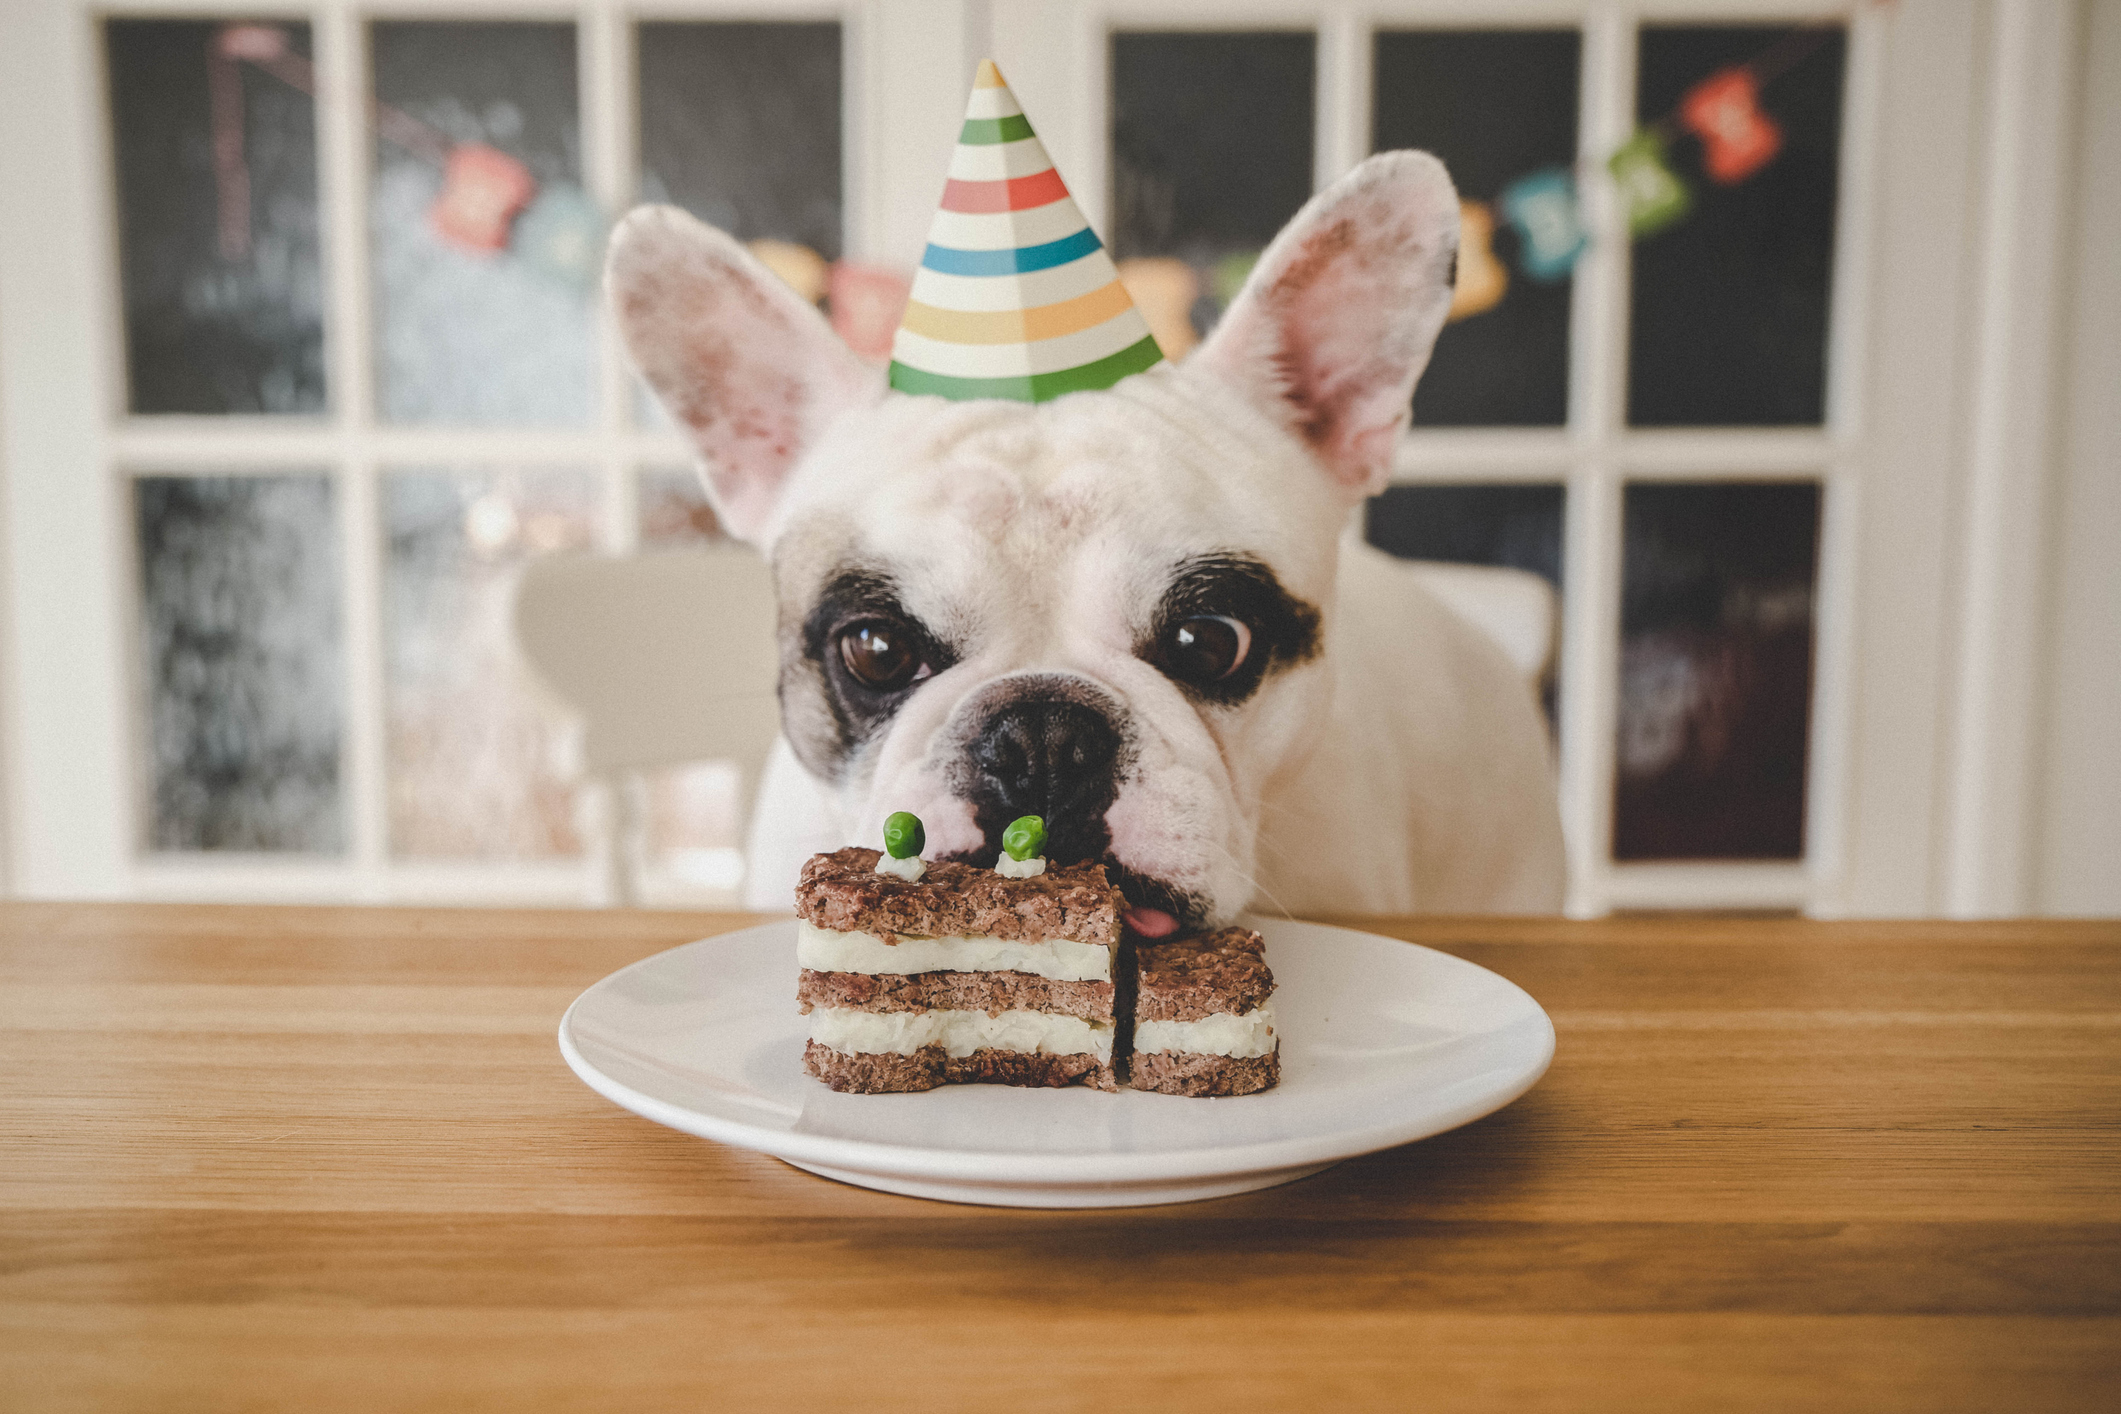 French bulldog wearing a party hat sits at a table, staring at a plate with a cake topped with peas. Birthday decorations are in the background